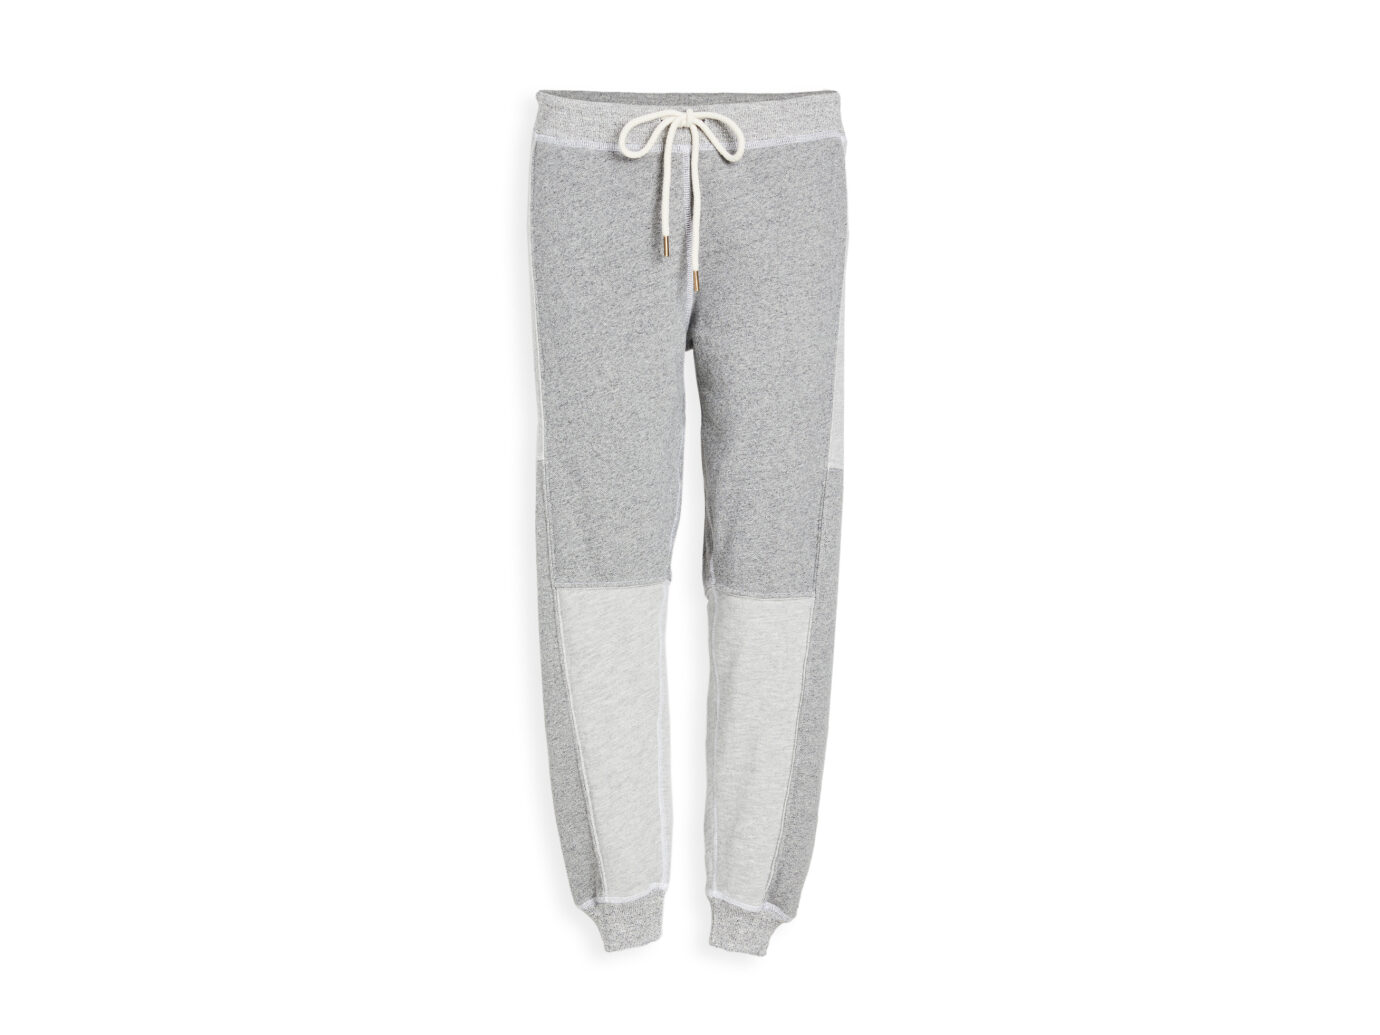 THE GREAT. Patchwork Cropped Sweatpants